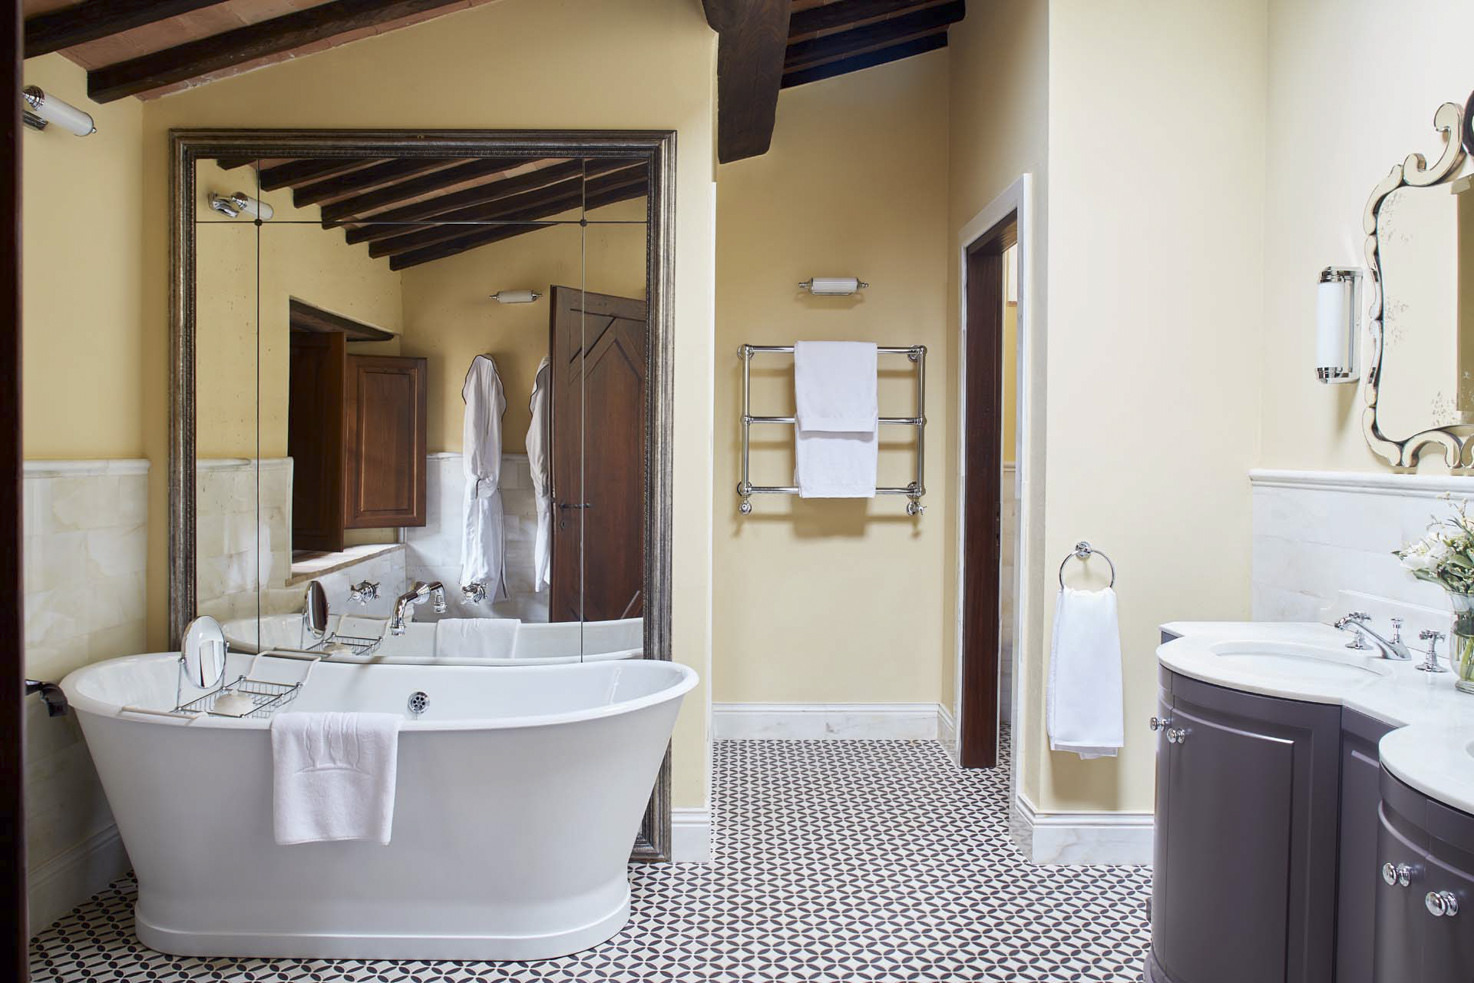 Bathroom of a Deluxe Double Room